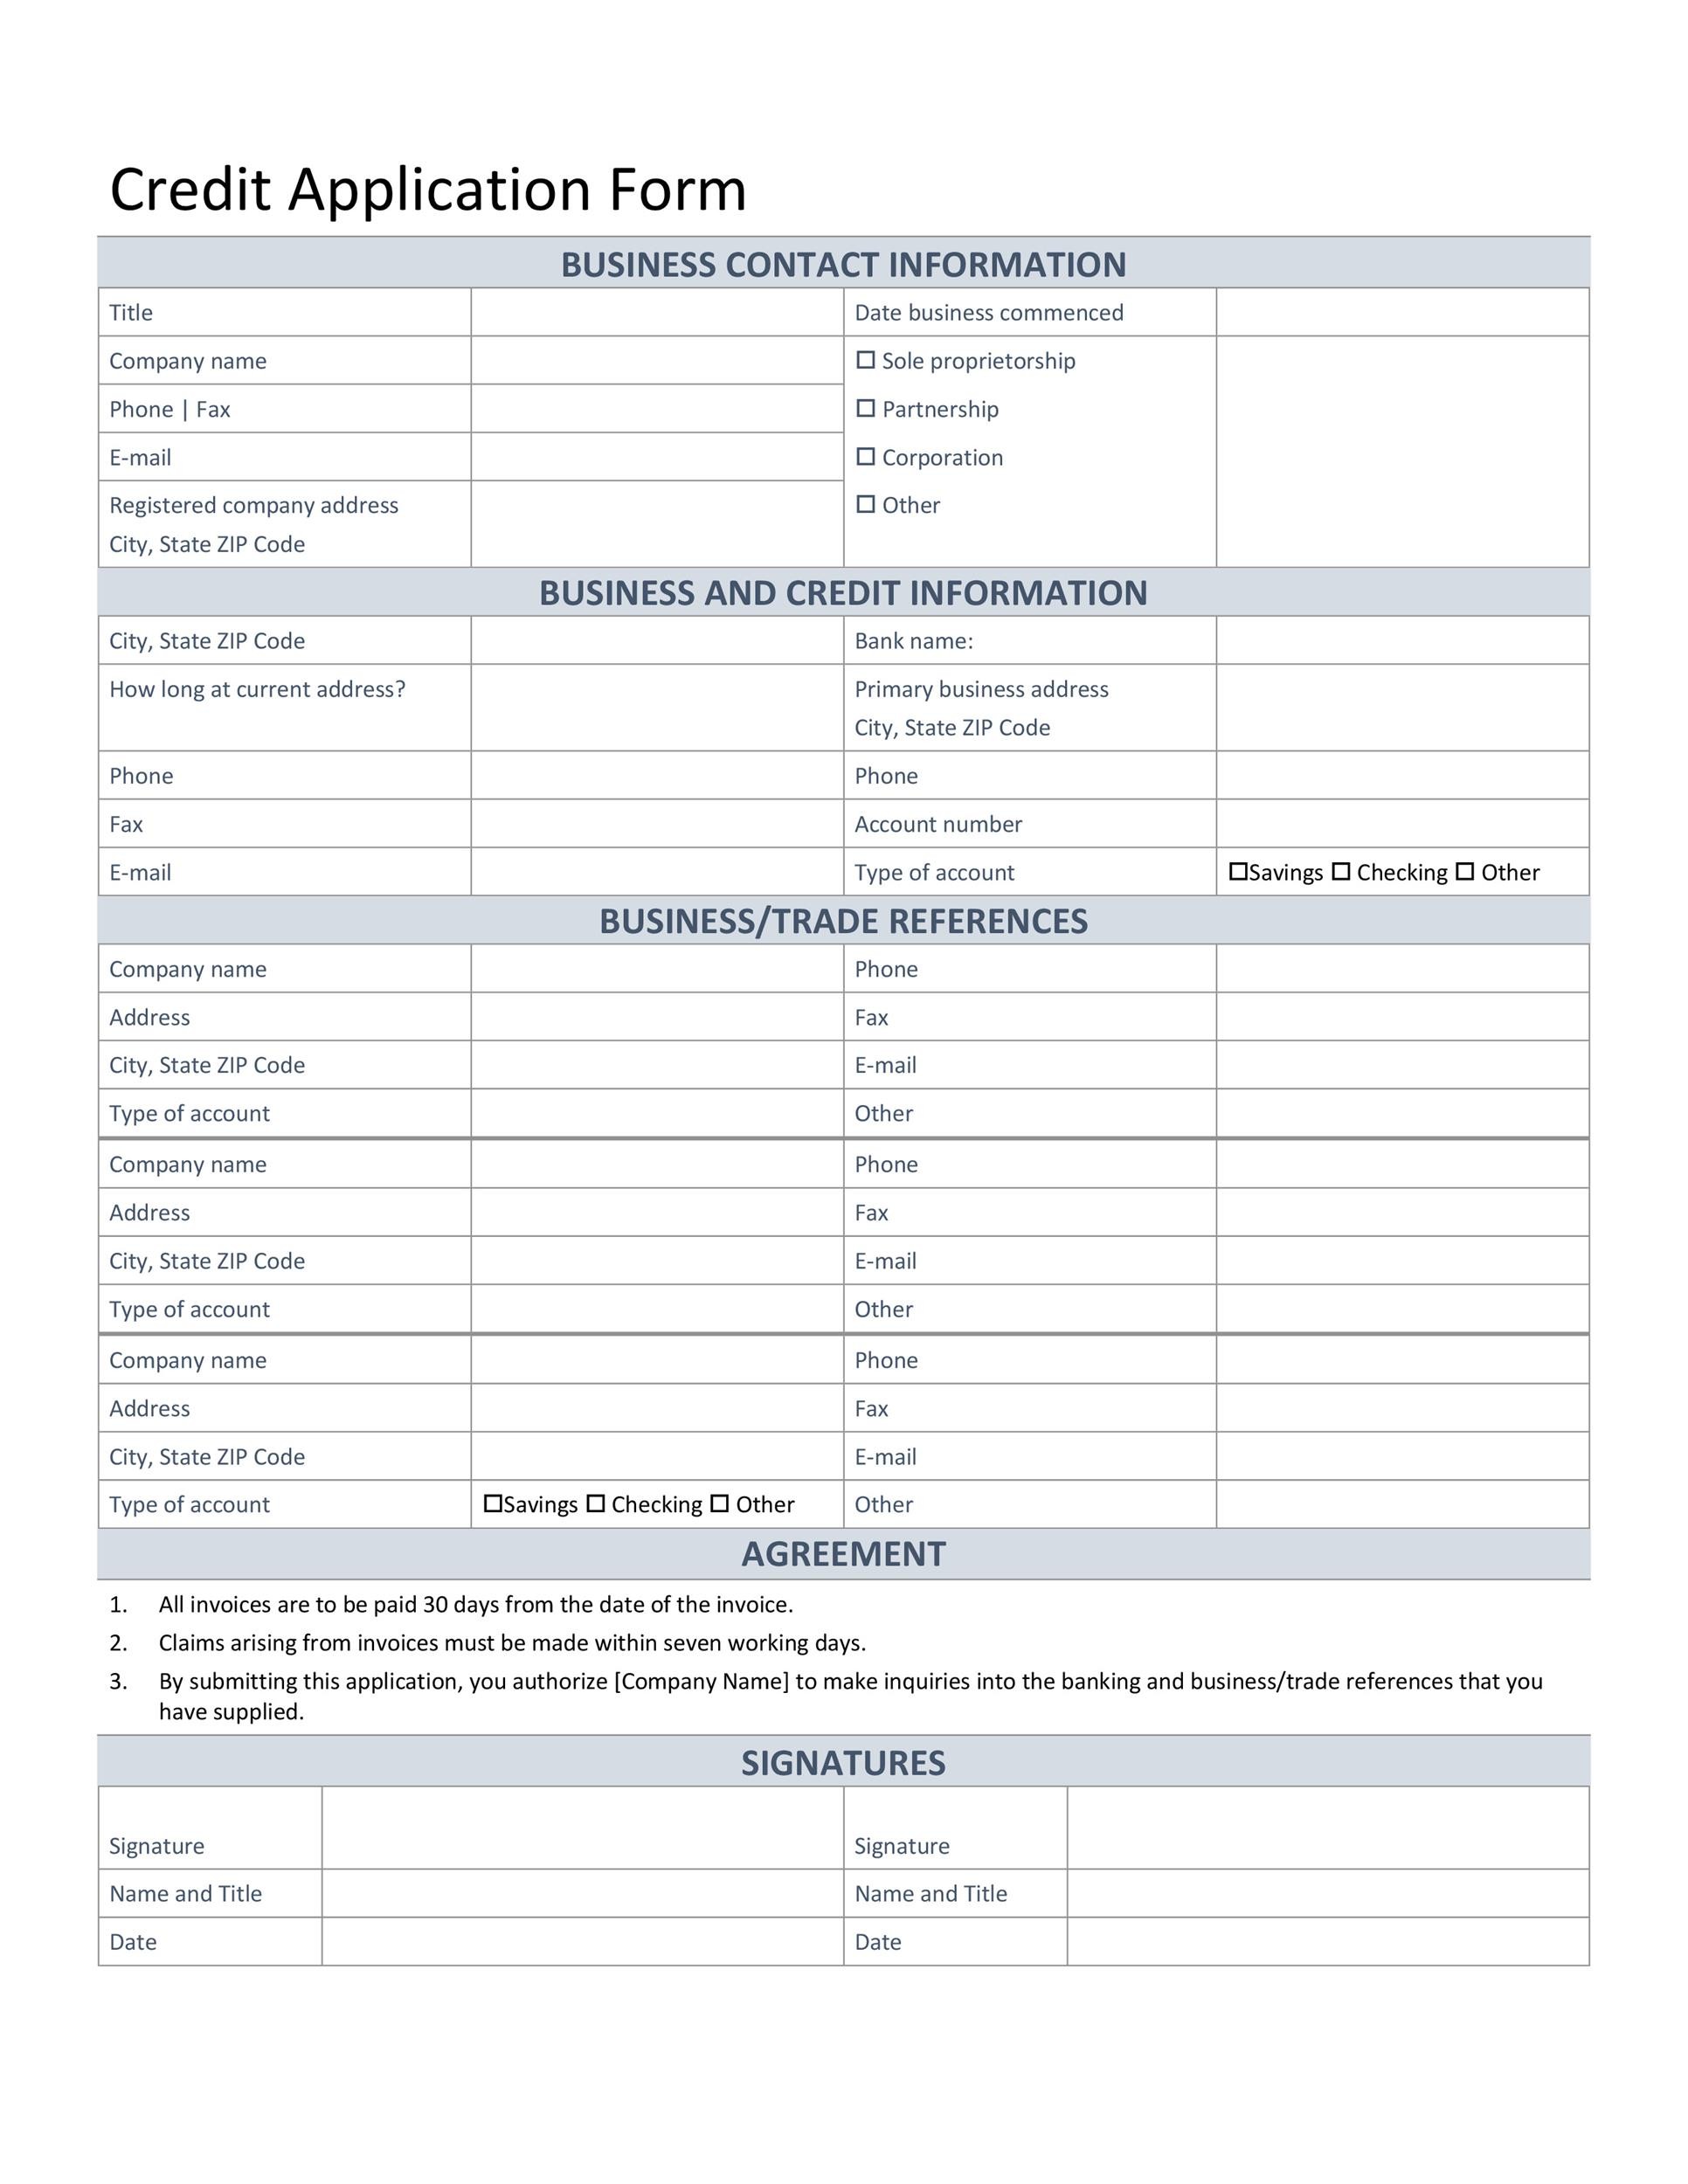 40 Free Credit Application Form Templates & Samples